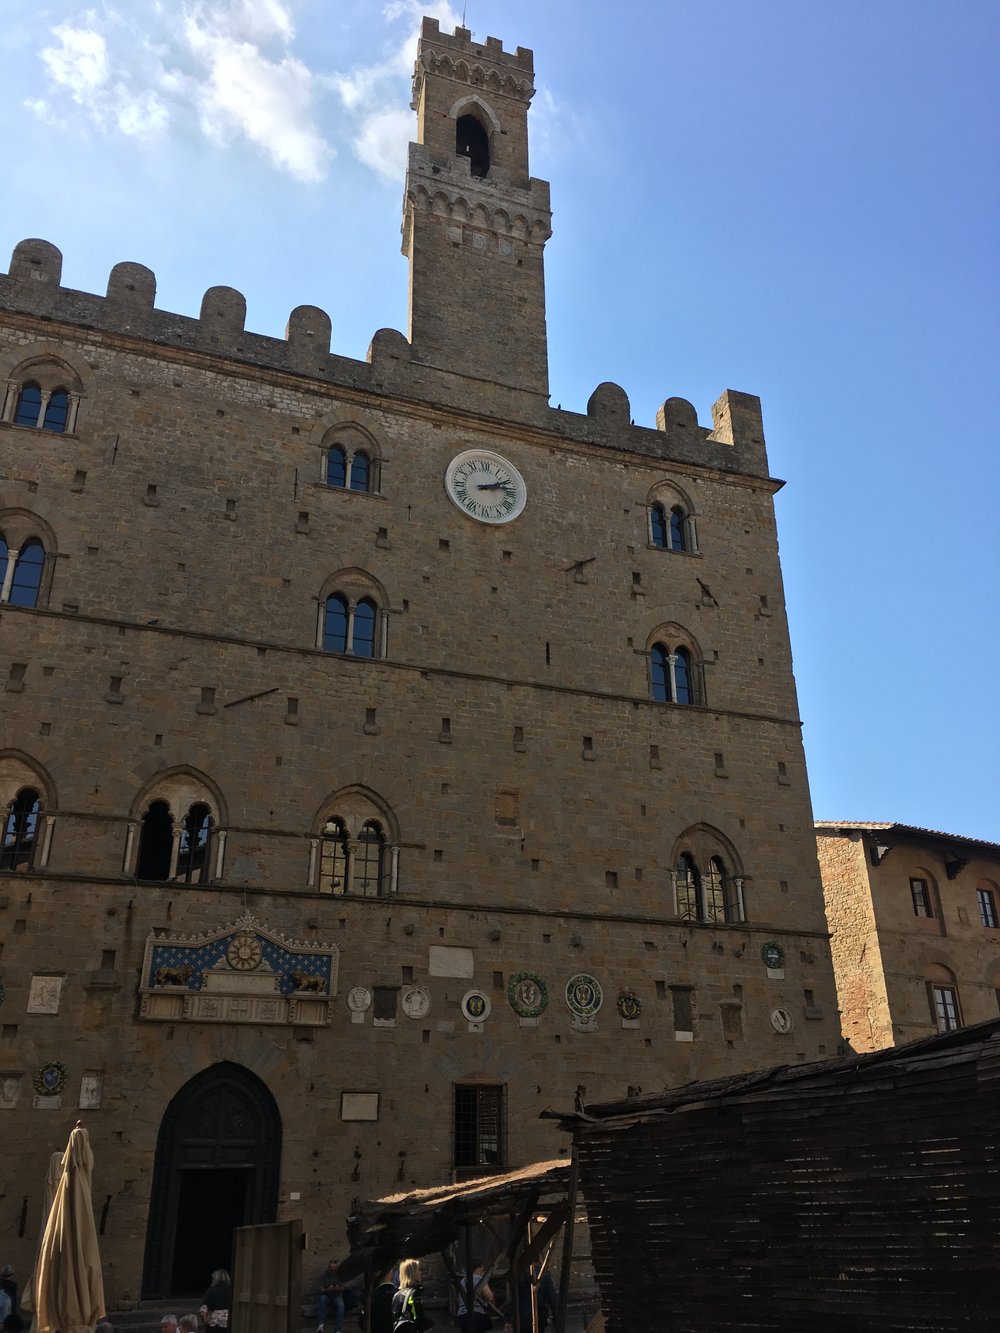 Volterra Square- ten years ago I cycled the climb to this same spot.